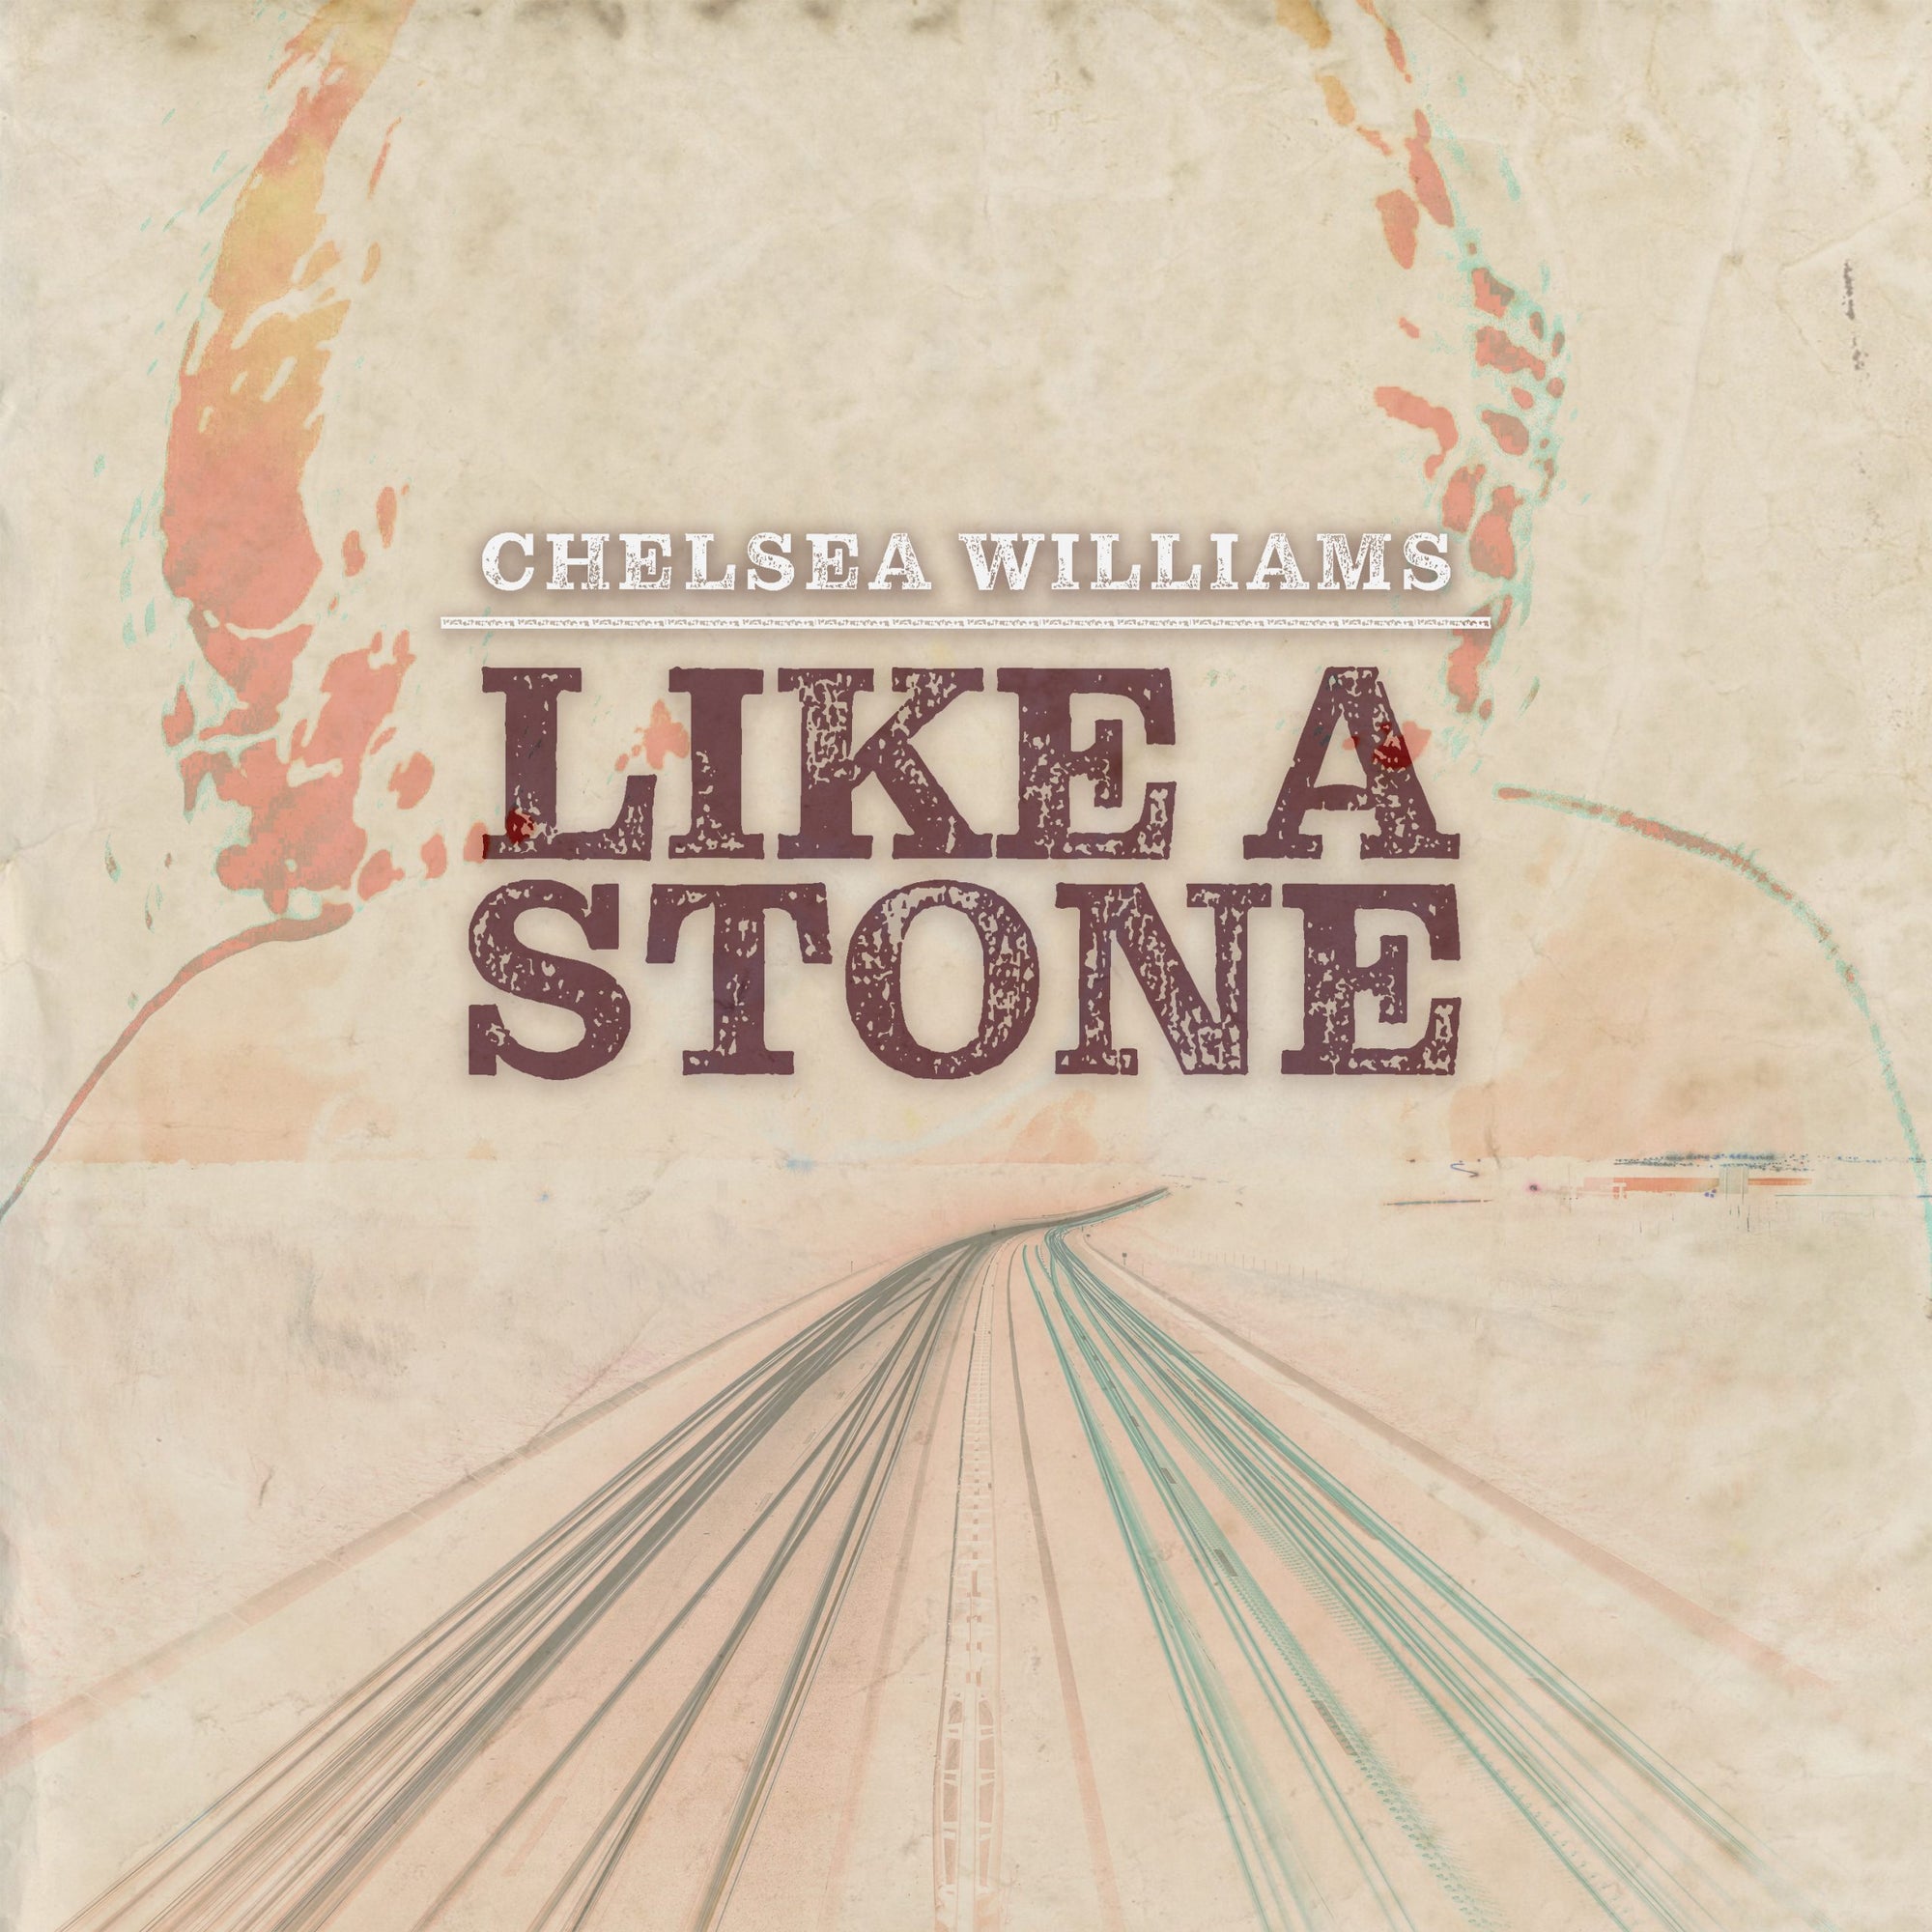 Chelsea Williams Keeps The Promise With New Chris Cornell Cover, "Like a Stone"